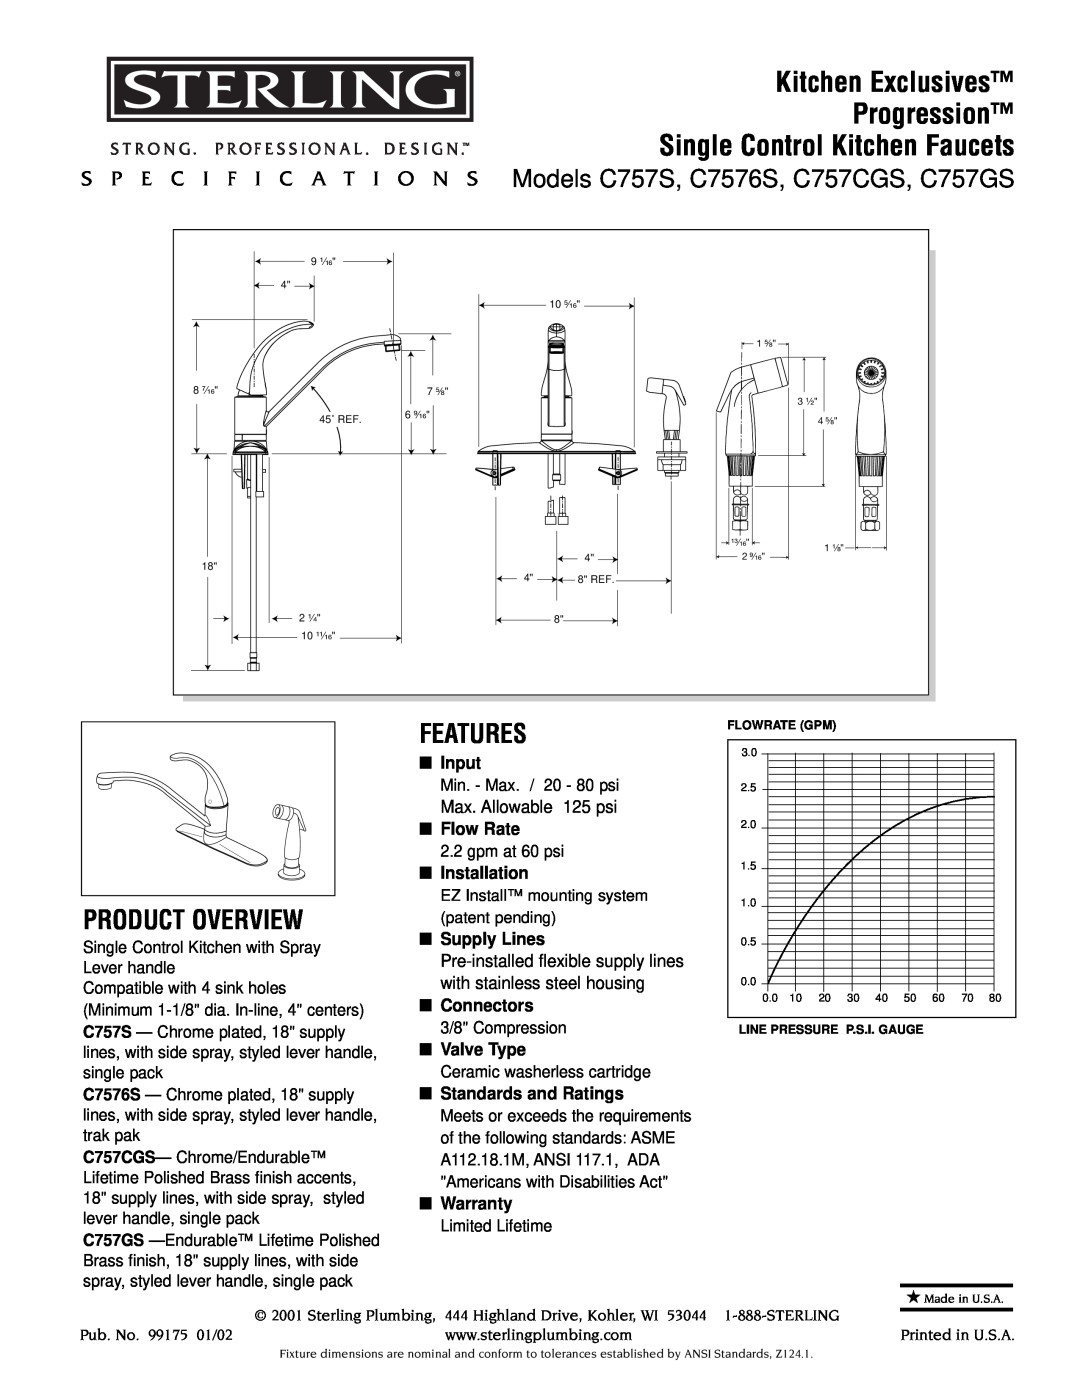 Sterling Plumbing C757CGS specifications Kitchen Exclusives Progression, Single Control Kitchen Faucets, Product Overview 